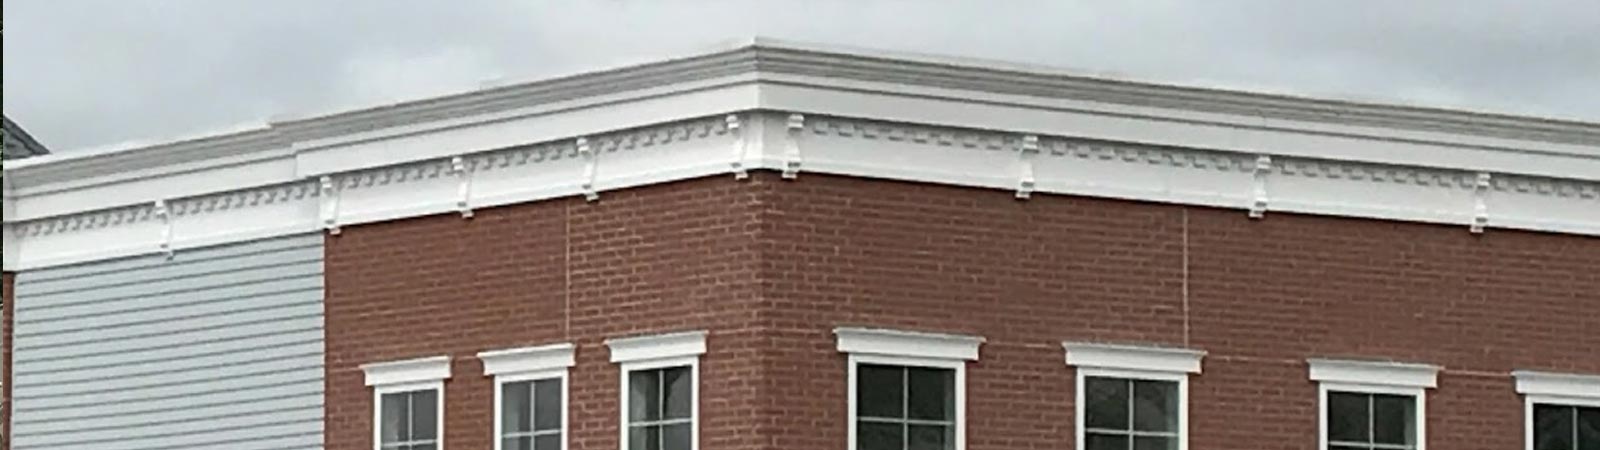 Up Close of Trim on Brick Building | PVC Pipes Norwalk | Pipe Materials Fairfield County